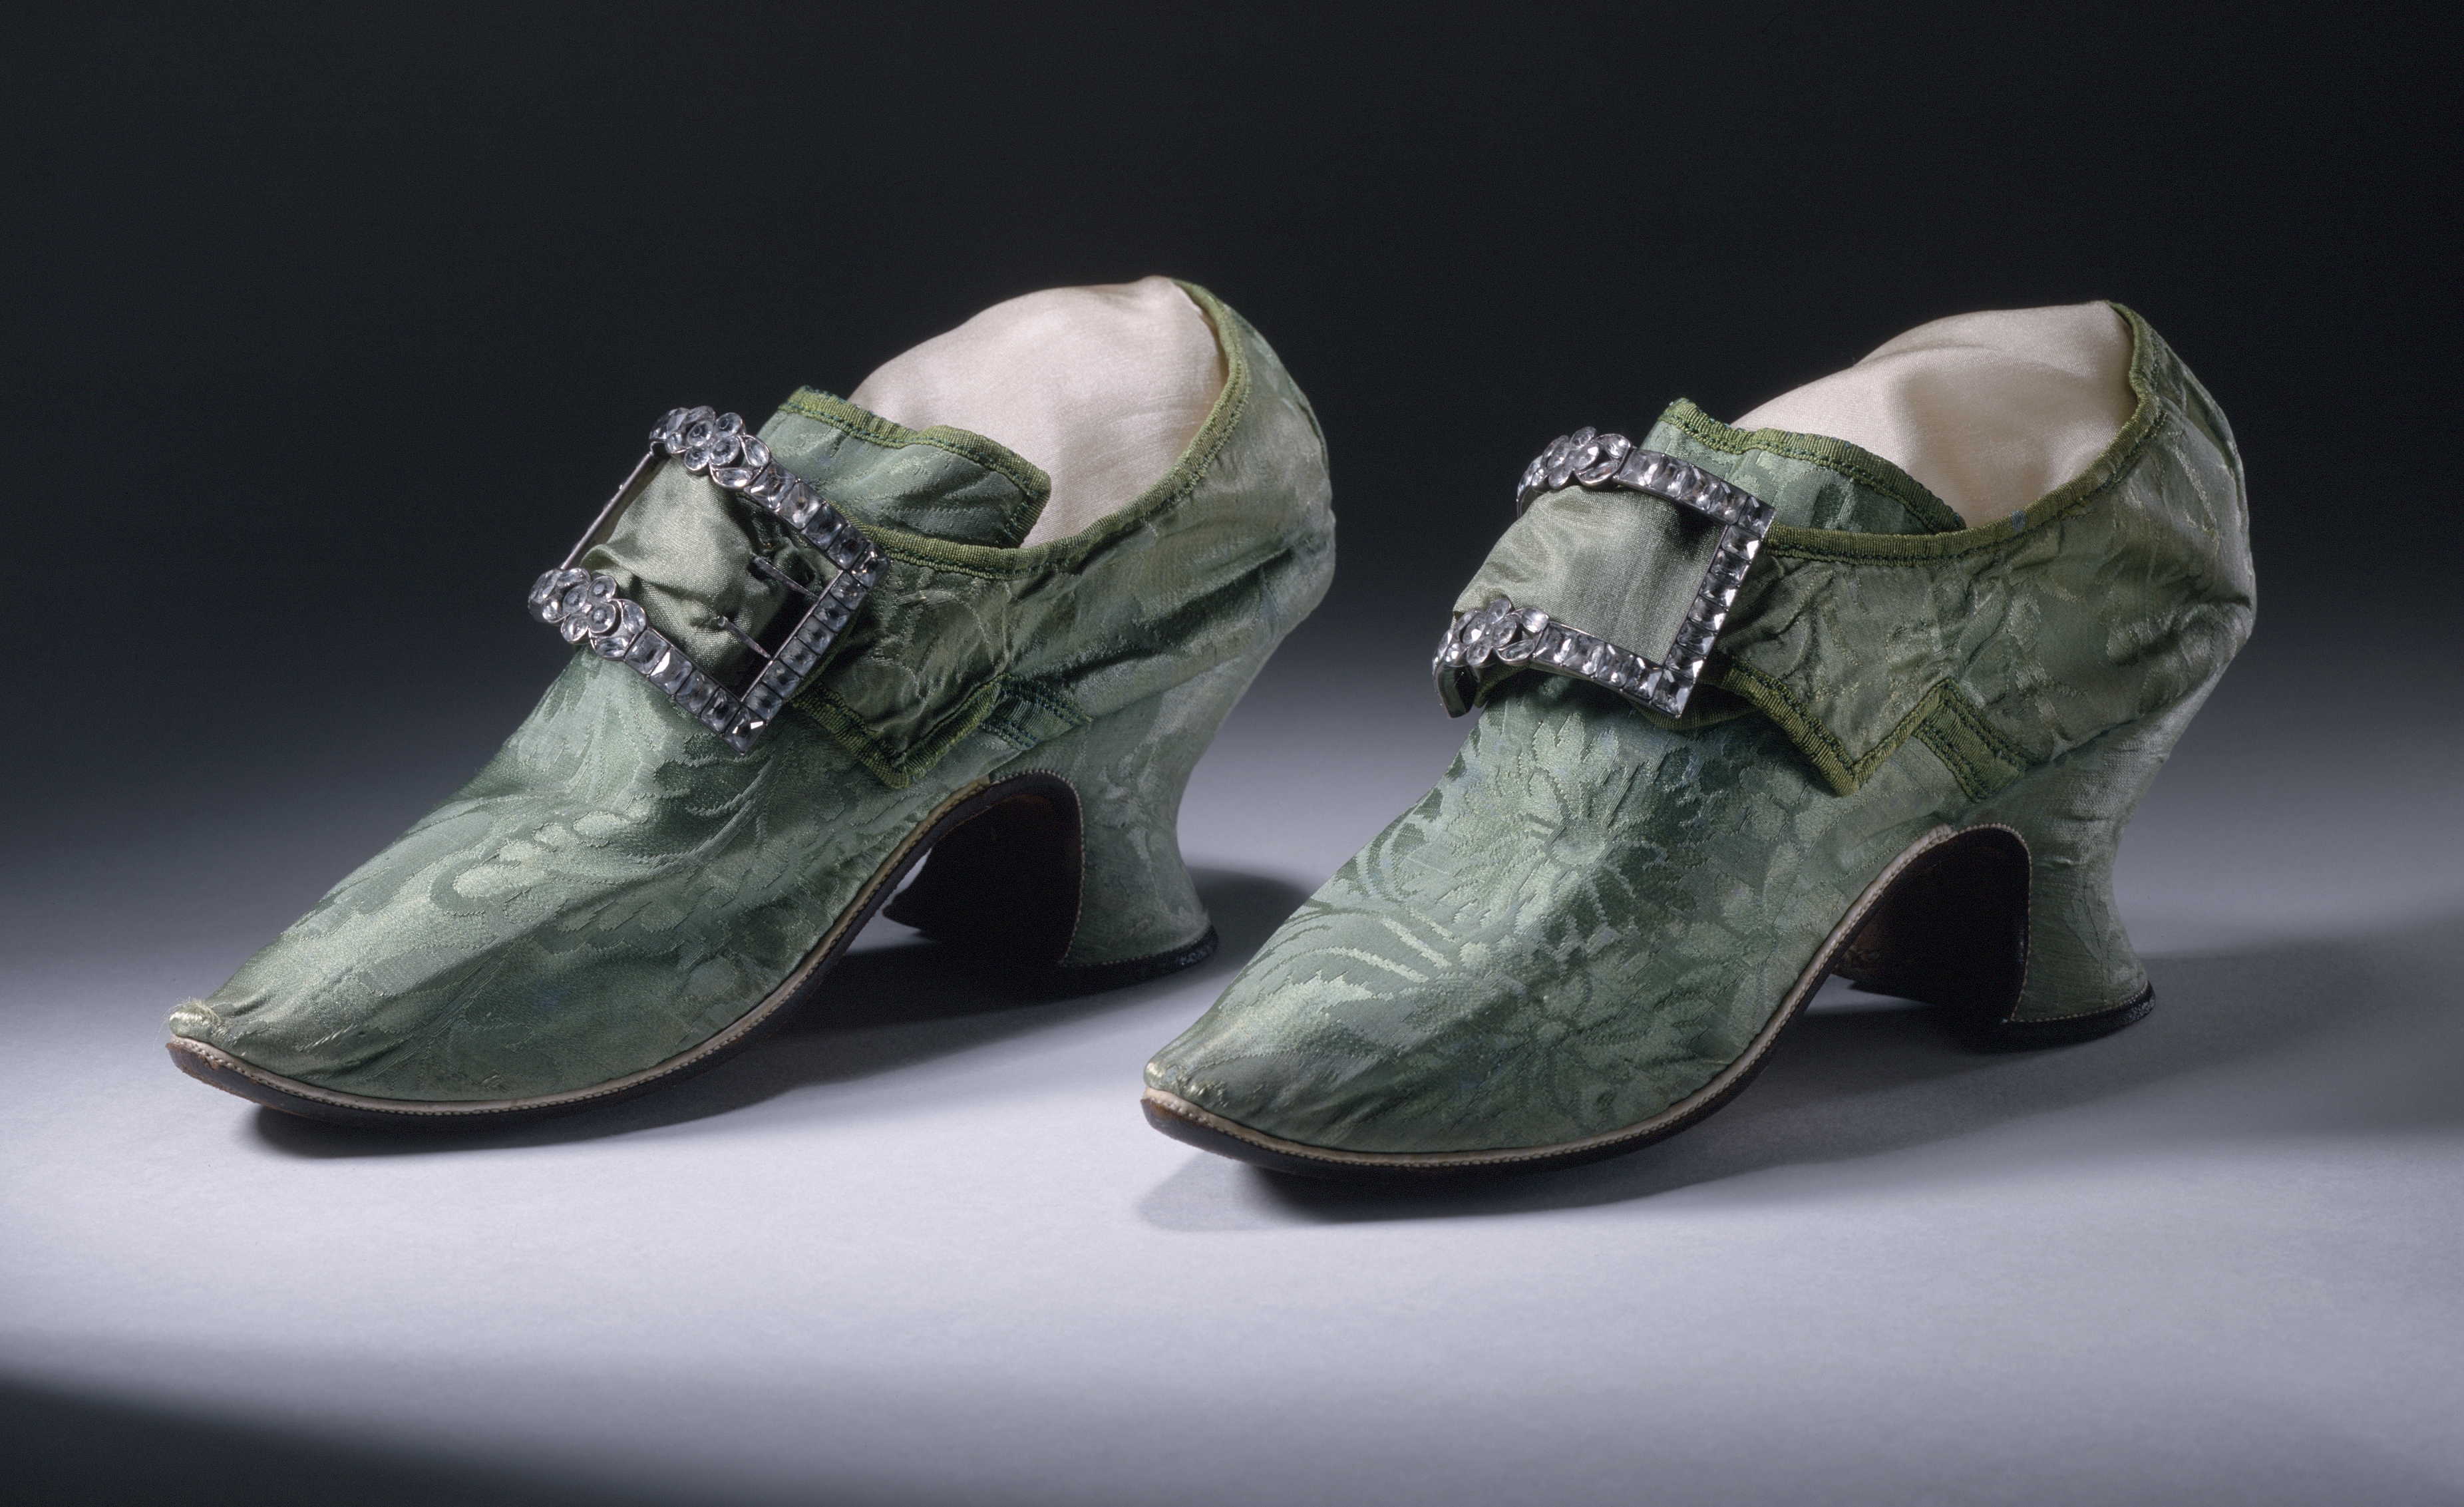 Woman's Spitalfields silk damask shoes with buckles 1740s